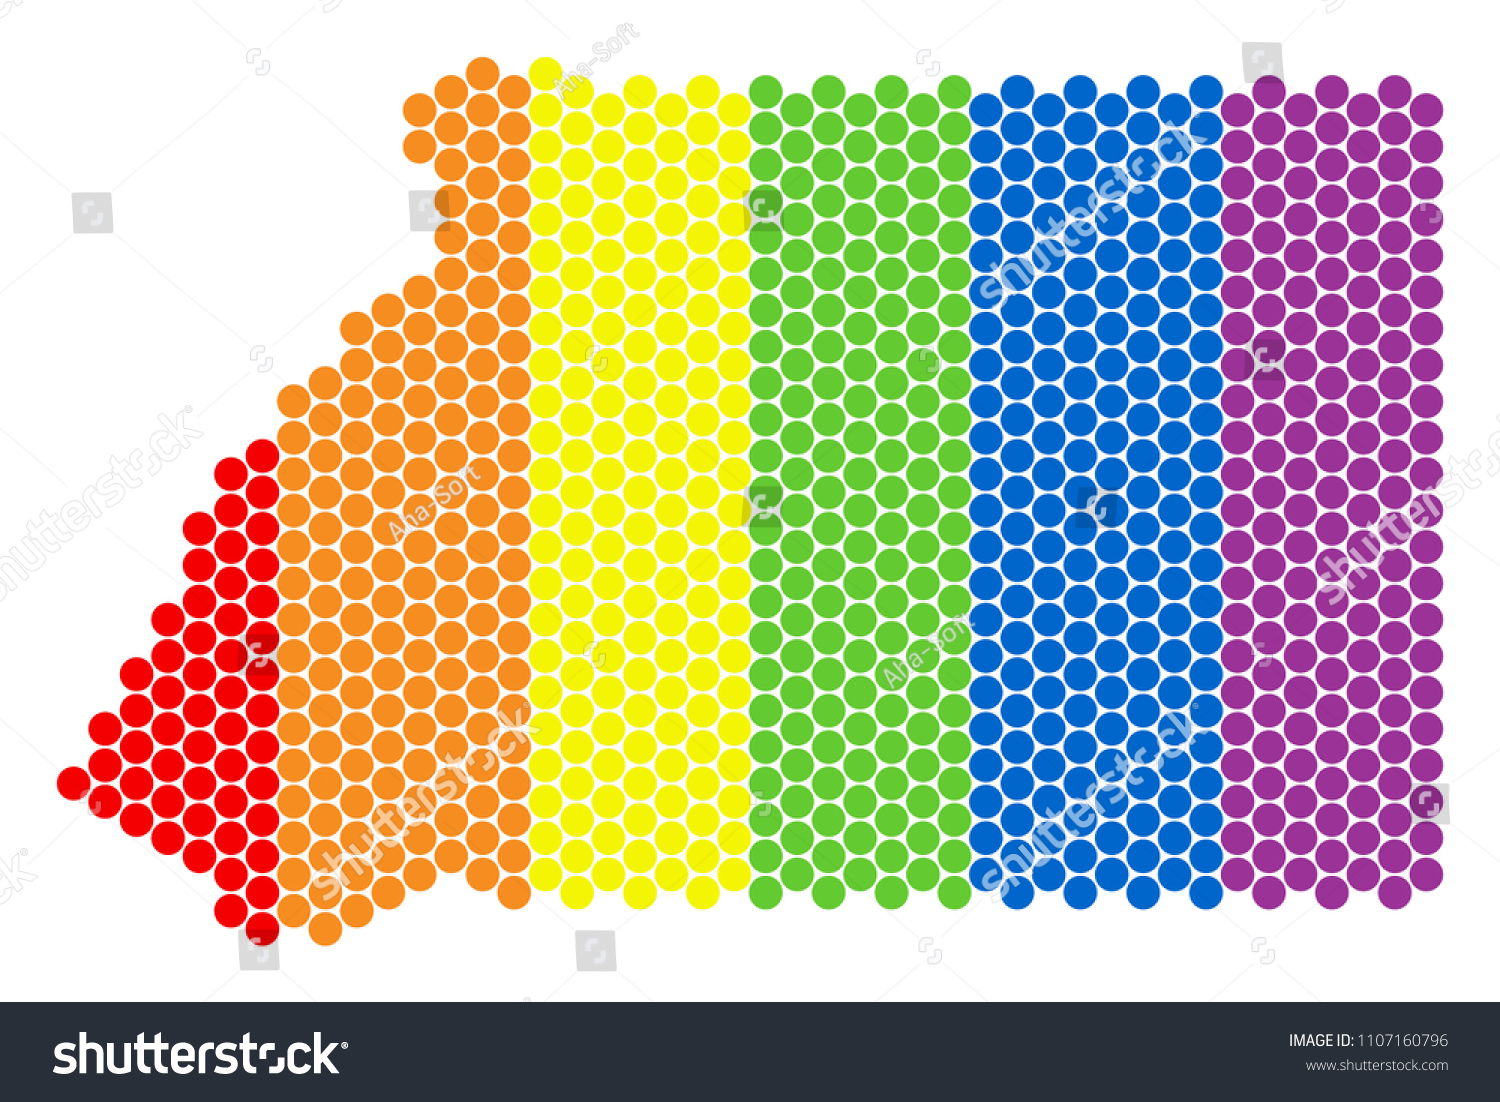 A Dotted Lgbt Equatorial Guinea Map For Lesbians Royalty Free Stock Vector 1107160796 7103